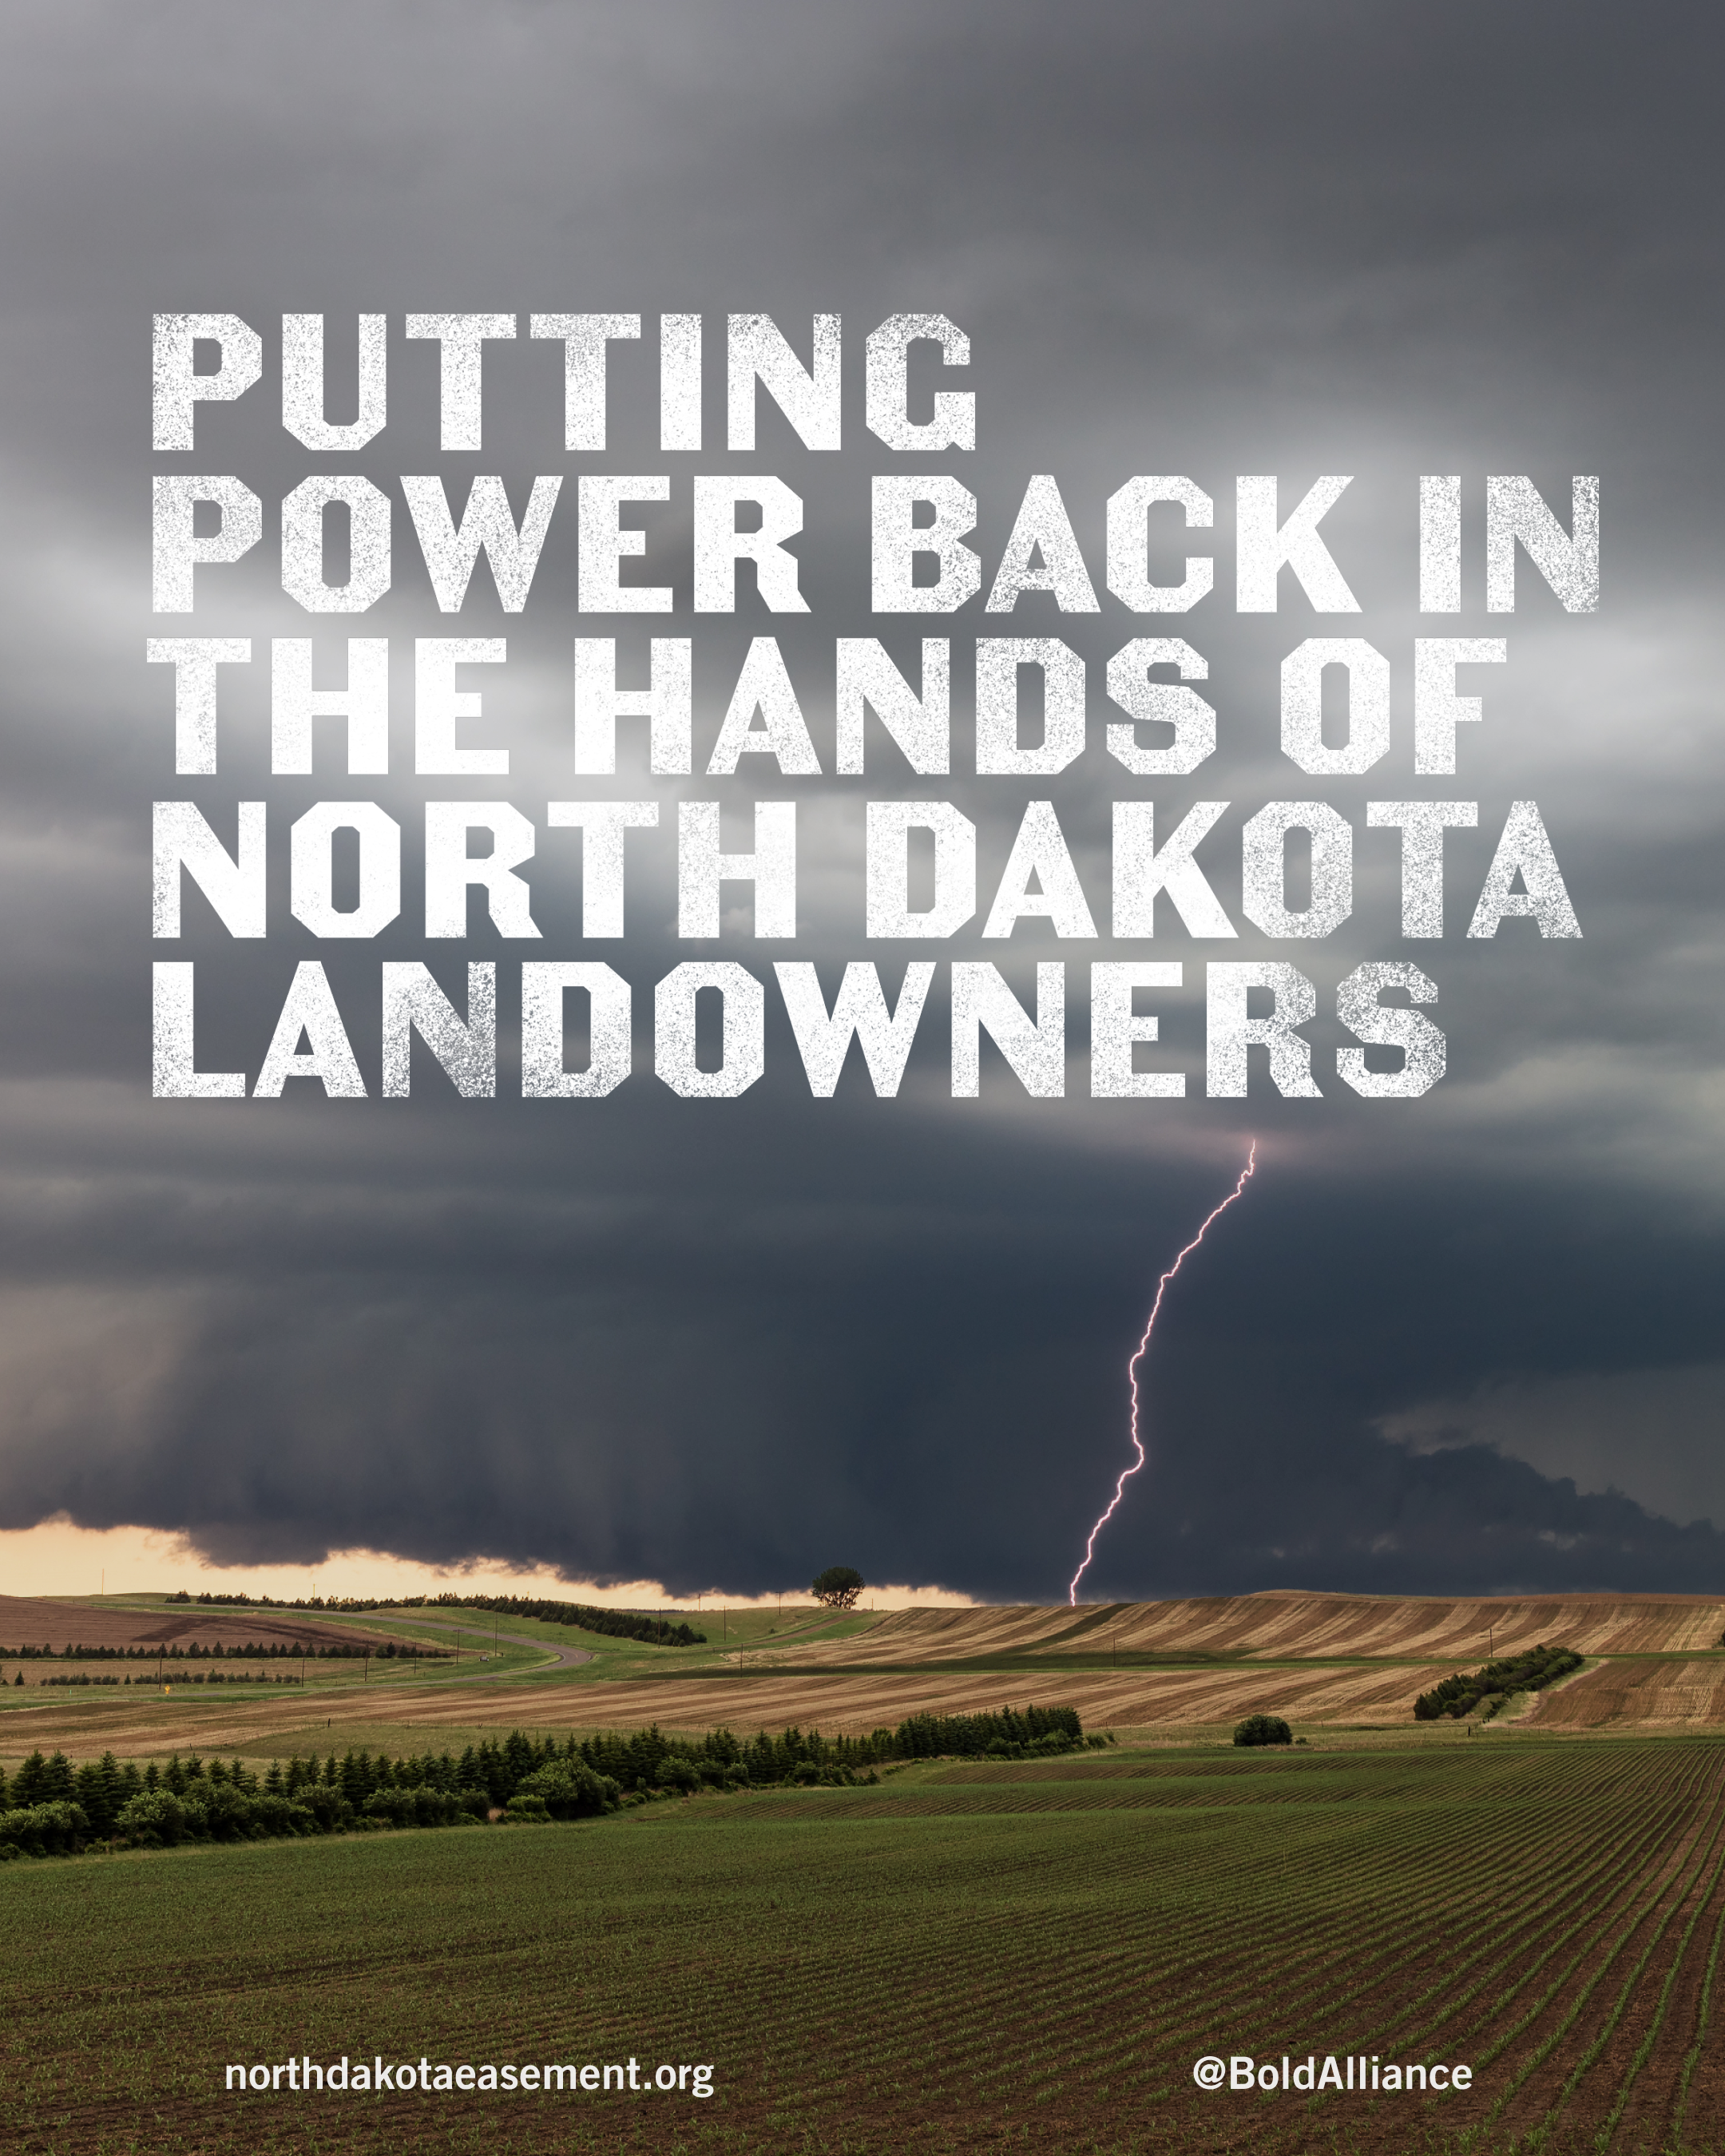 Stormy North Dakota landscape with white text PUTTING THE POWER BACK IN THE HANDS OF NORTH DAKOTA LANDOWNERS.